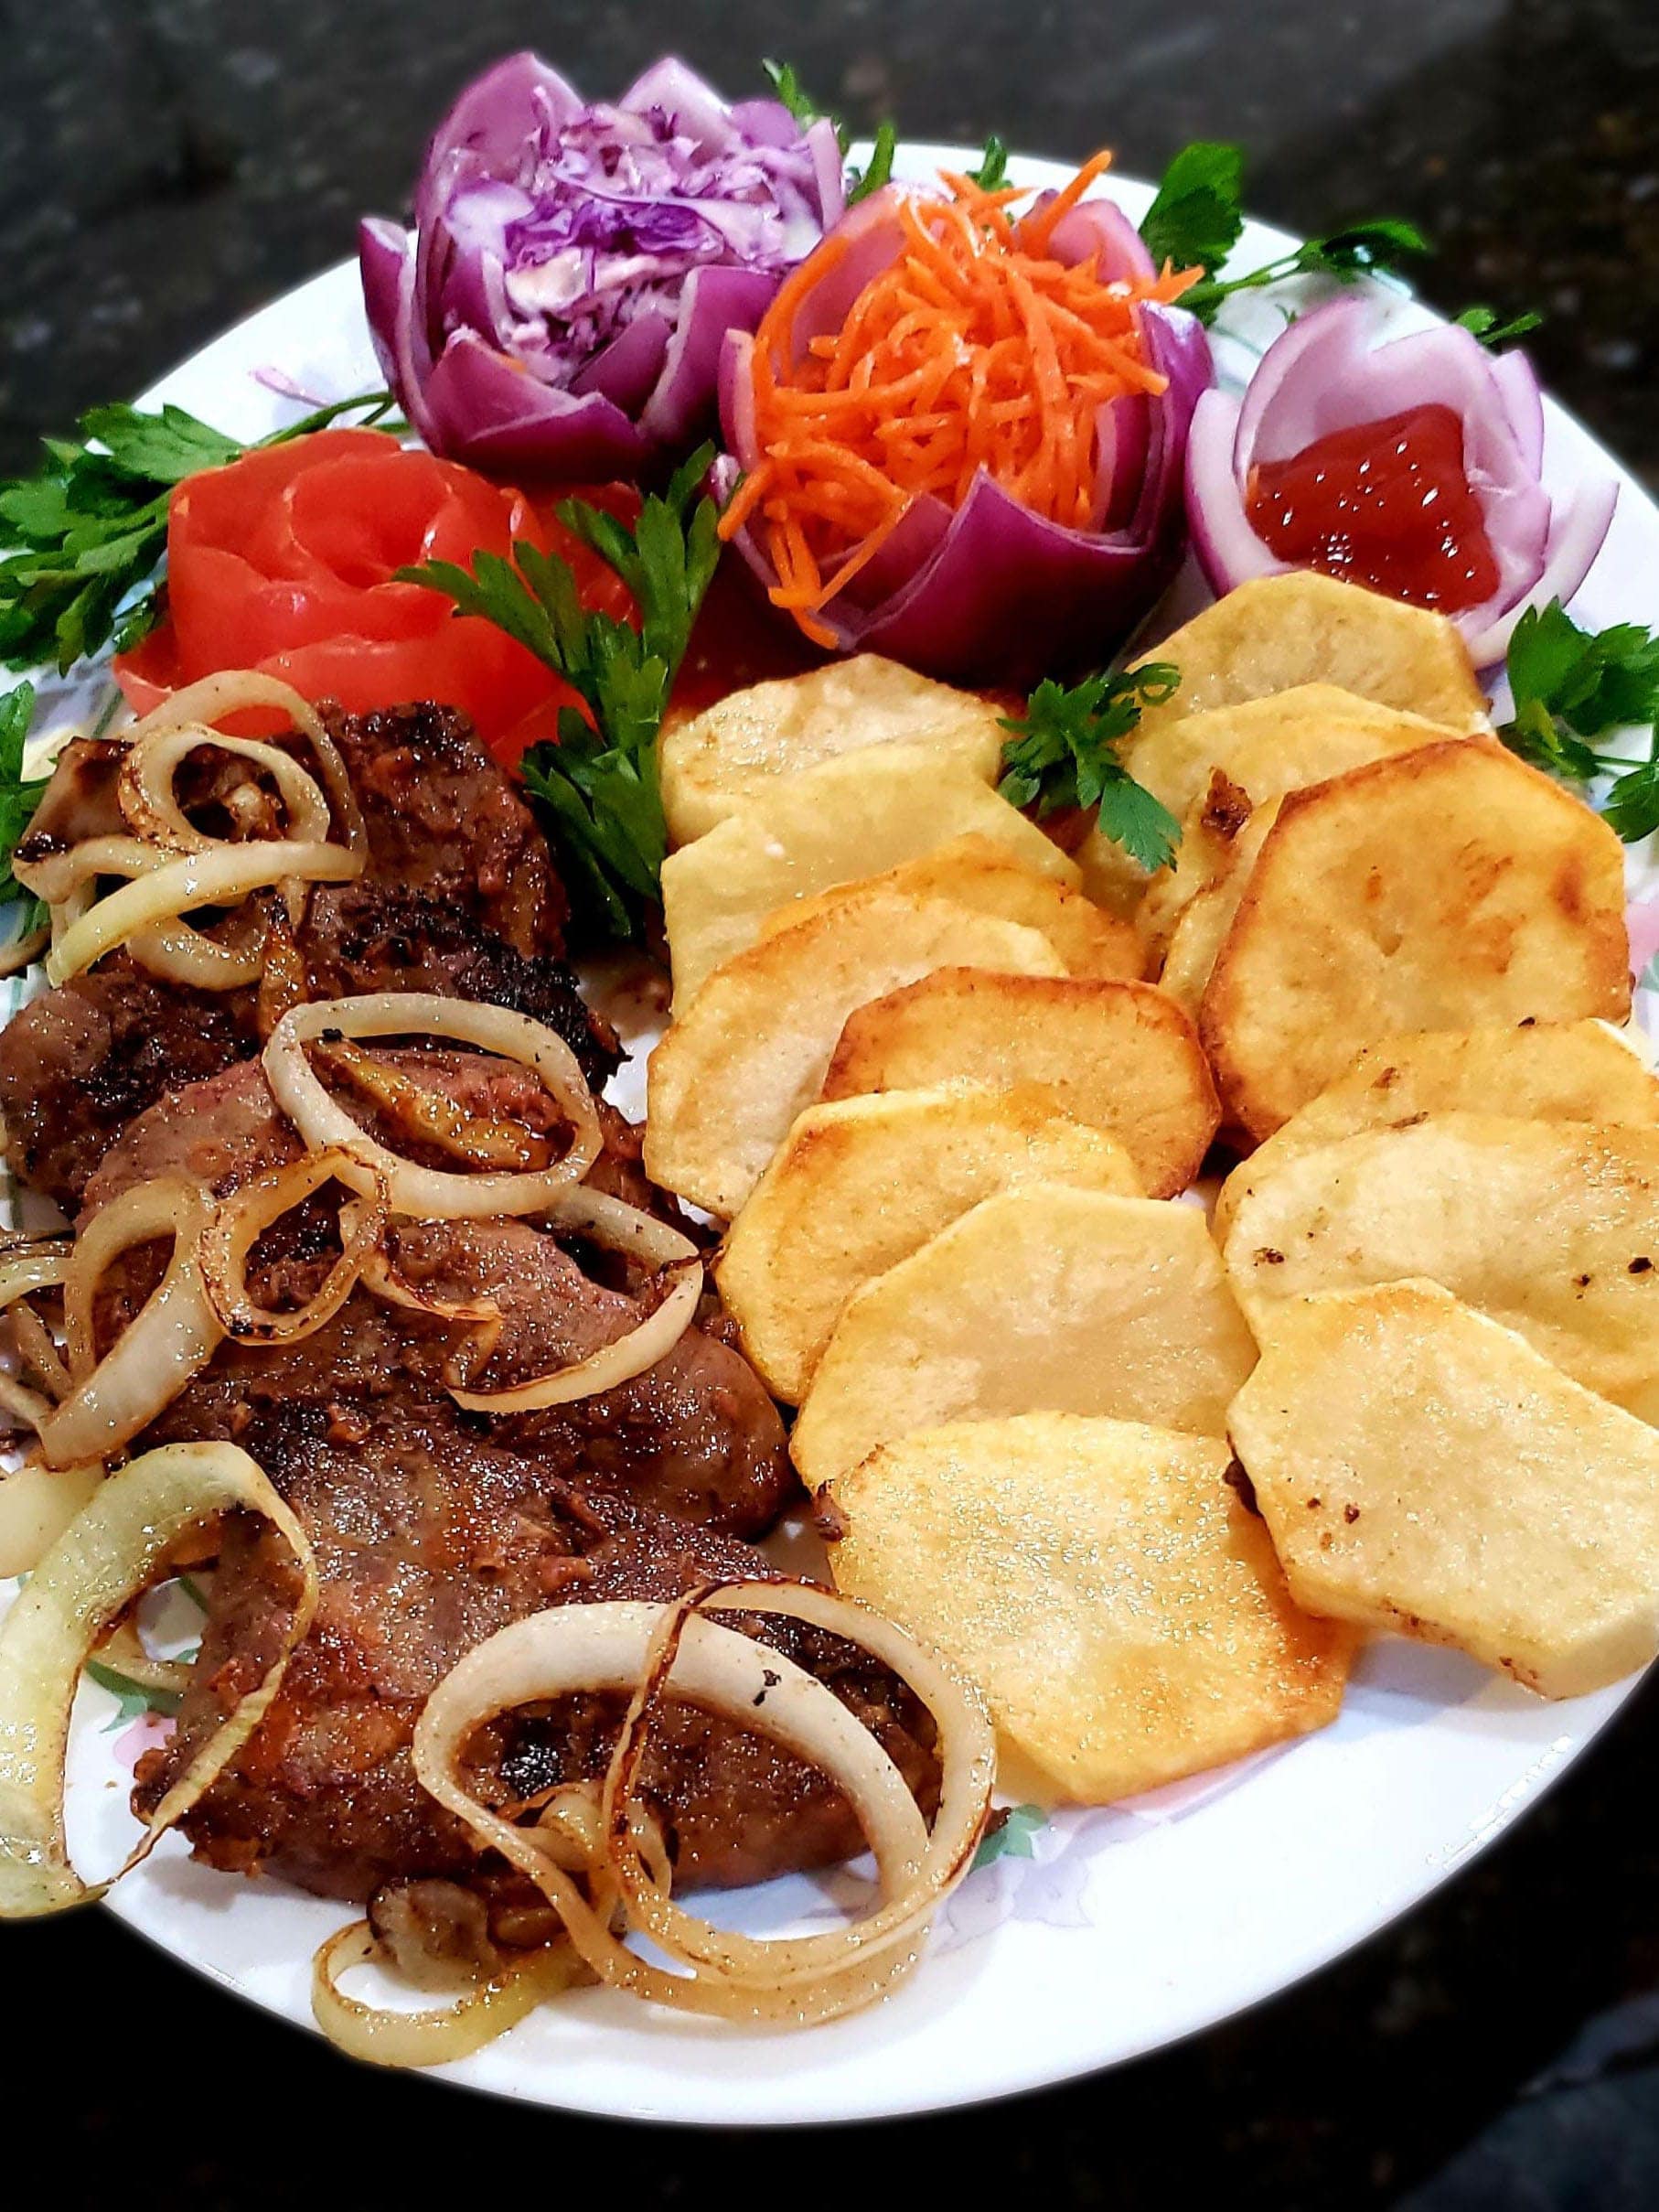 Fried Beef Liver and Potatoes with Caramelized Onions - Simple Tasty Eating